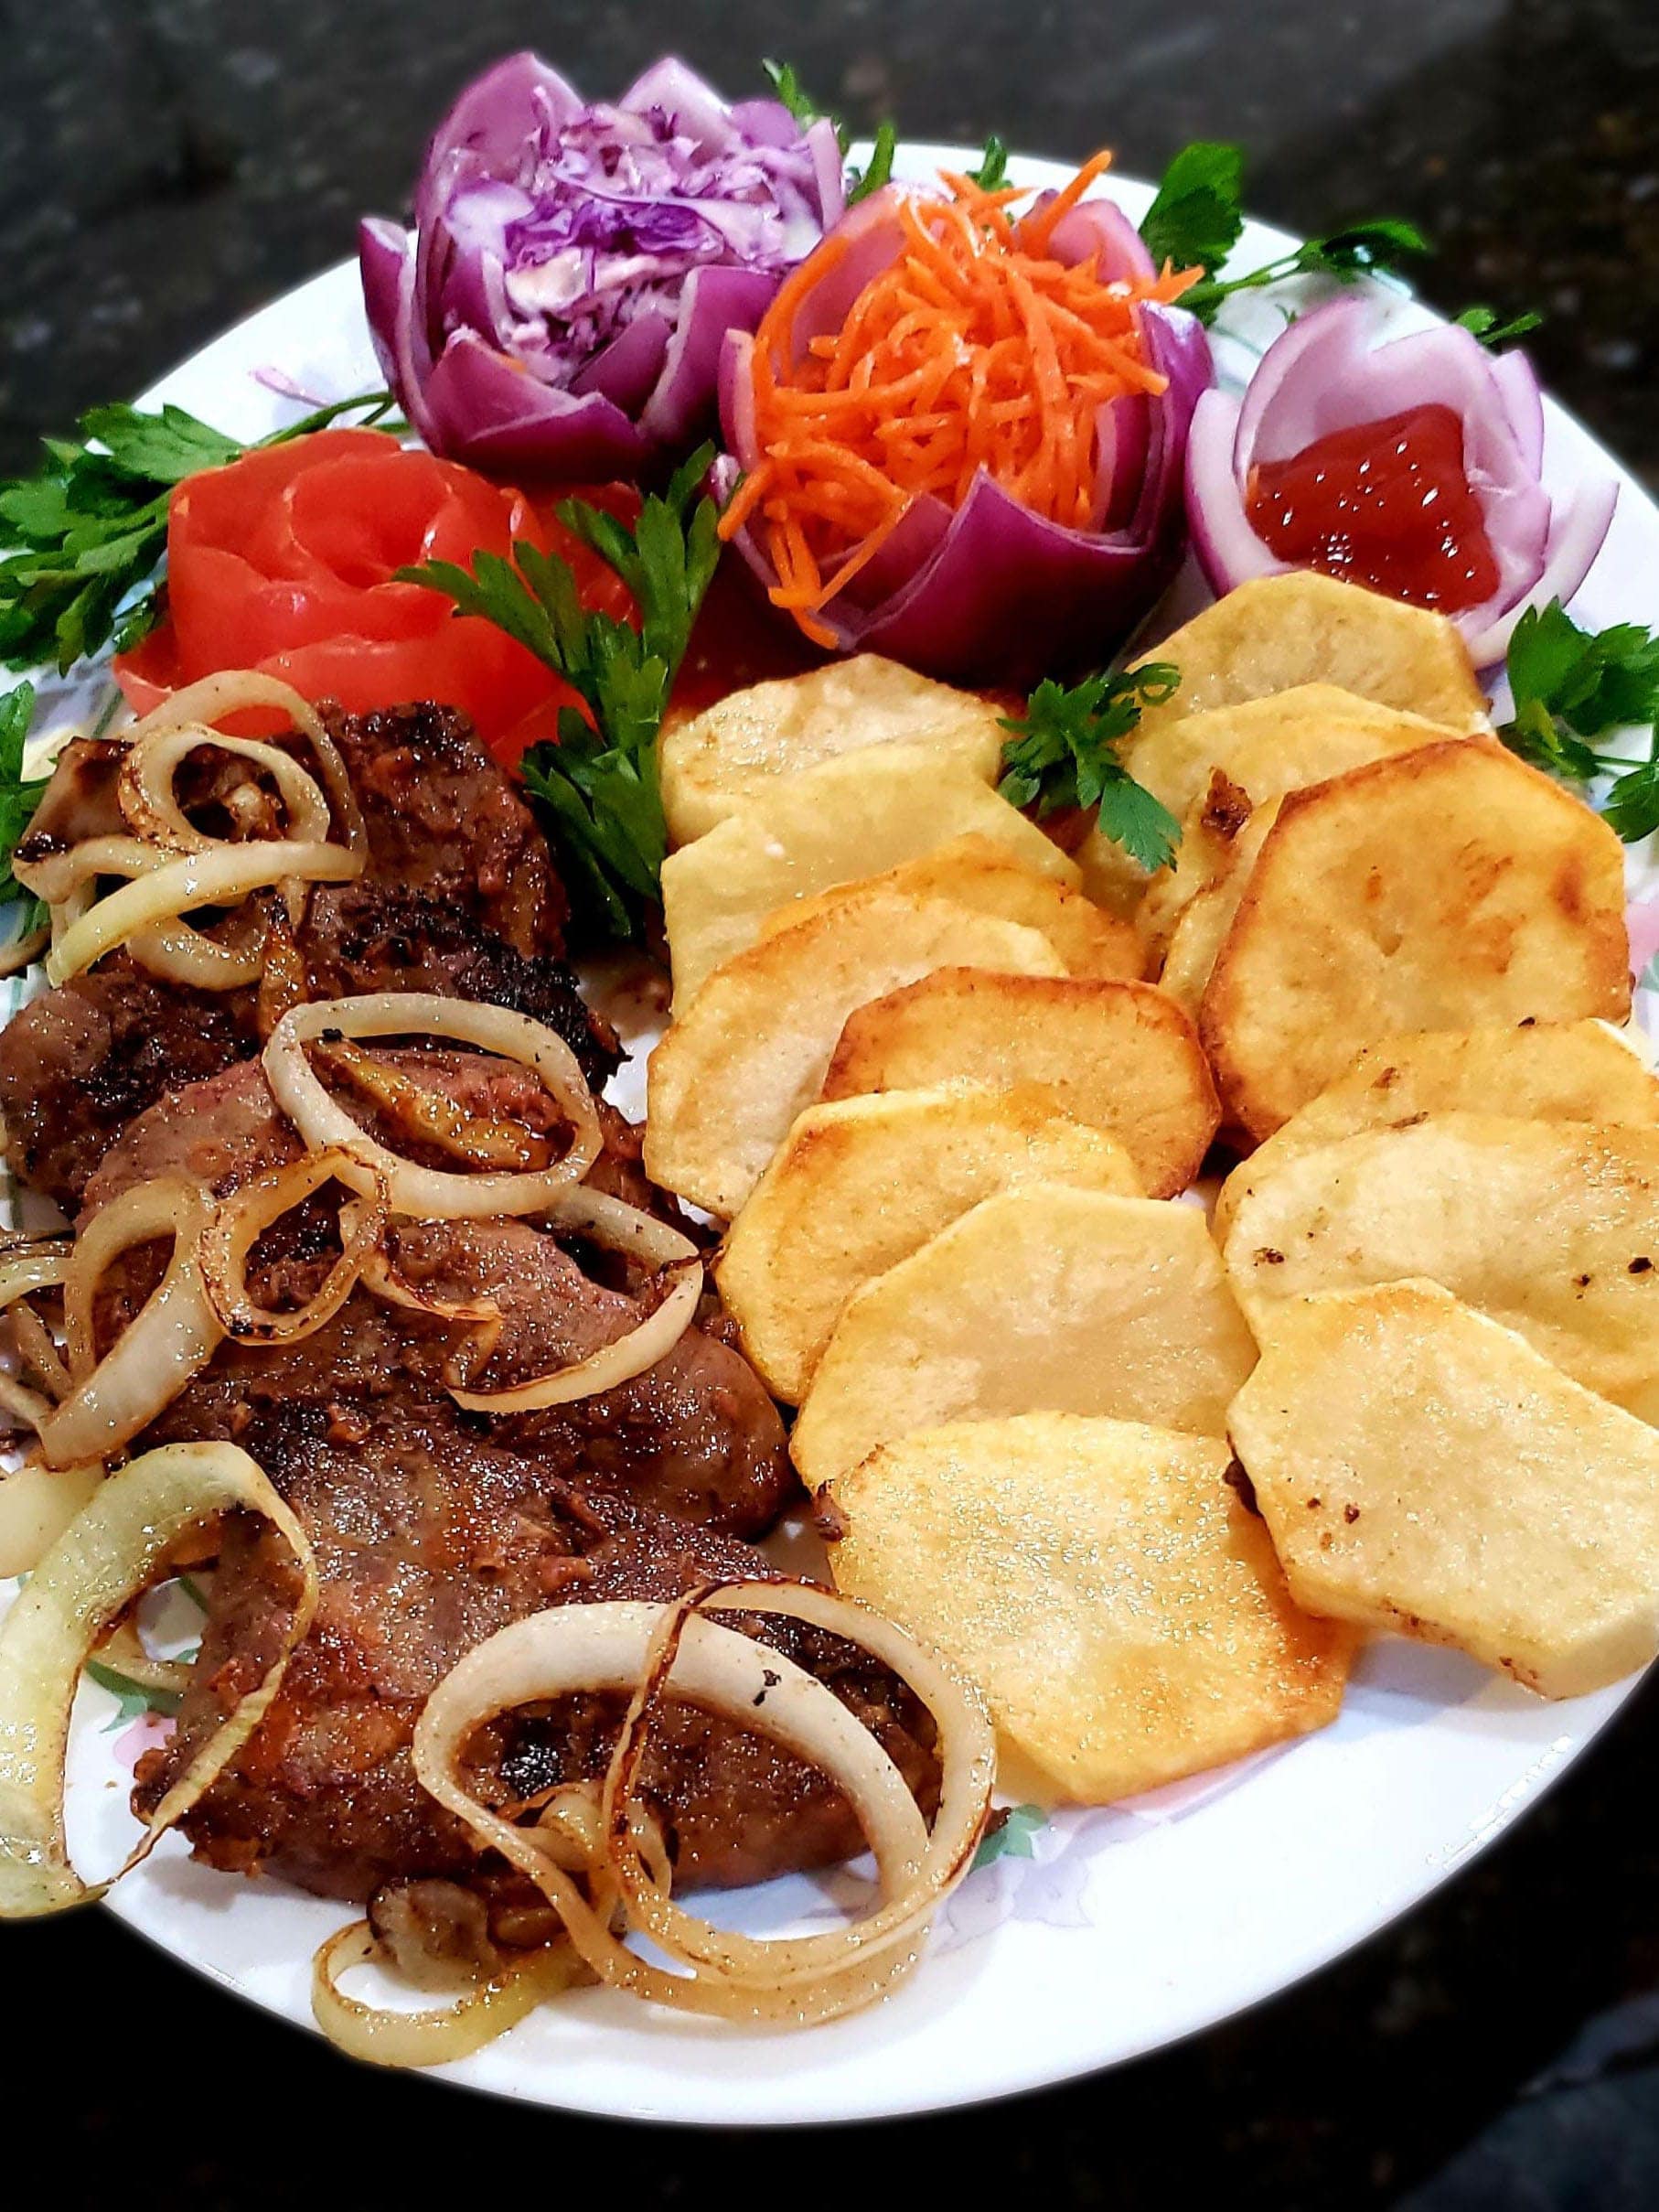 Fried Beef Liver and Potatoes with Caramelized Onions - Simple Tasty Eating